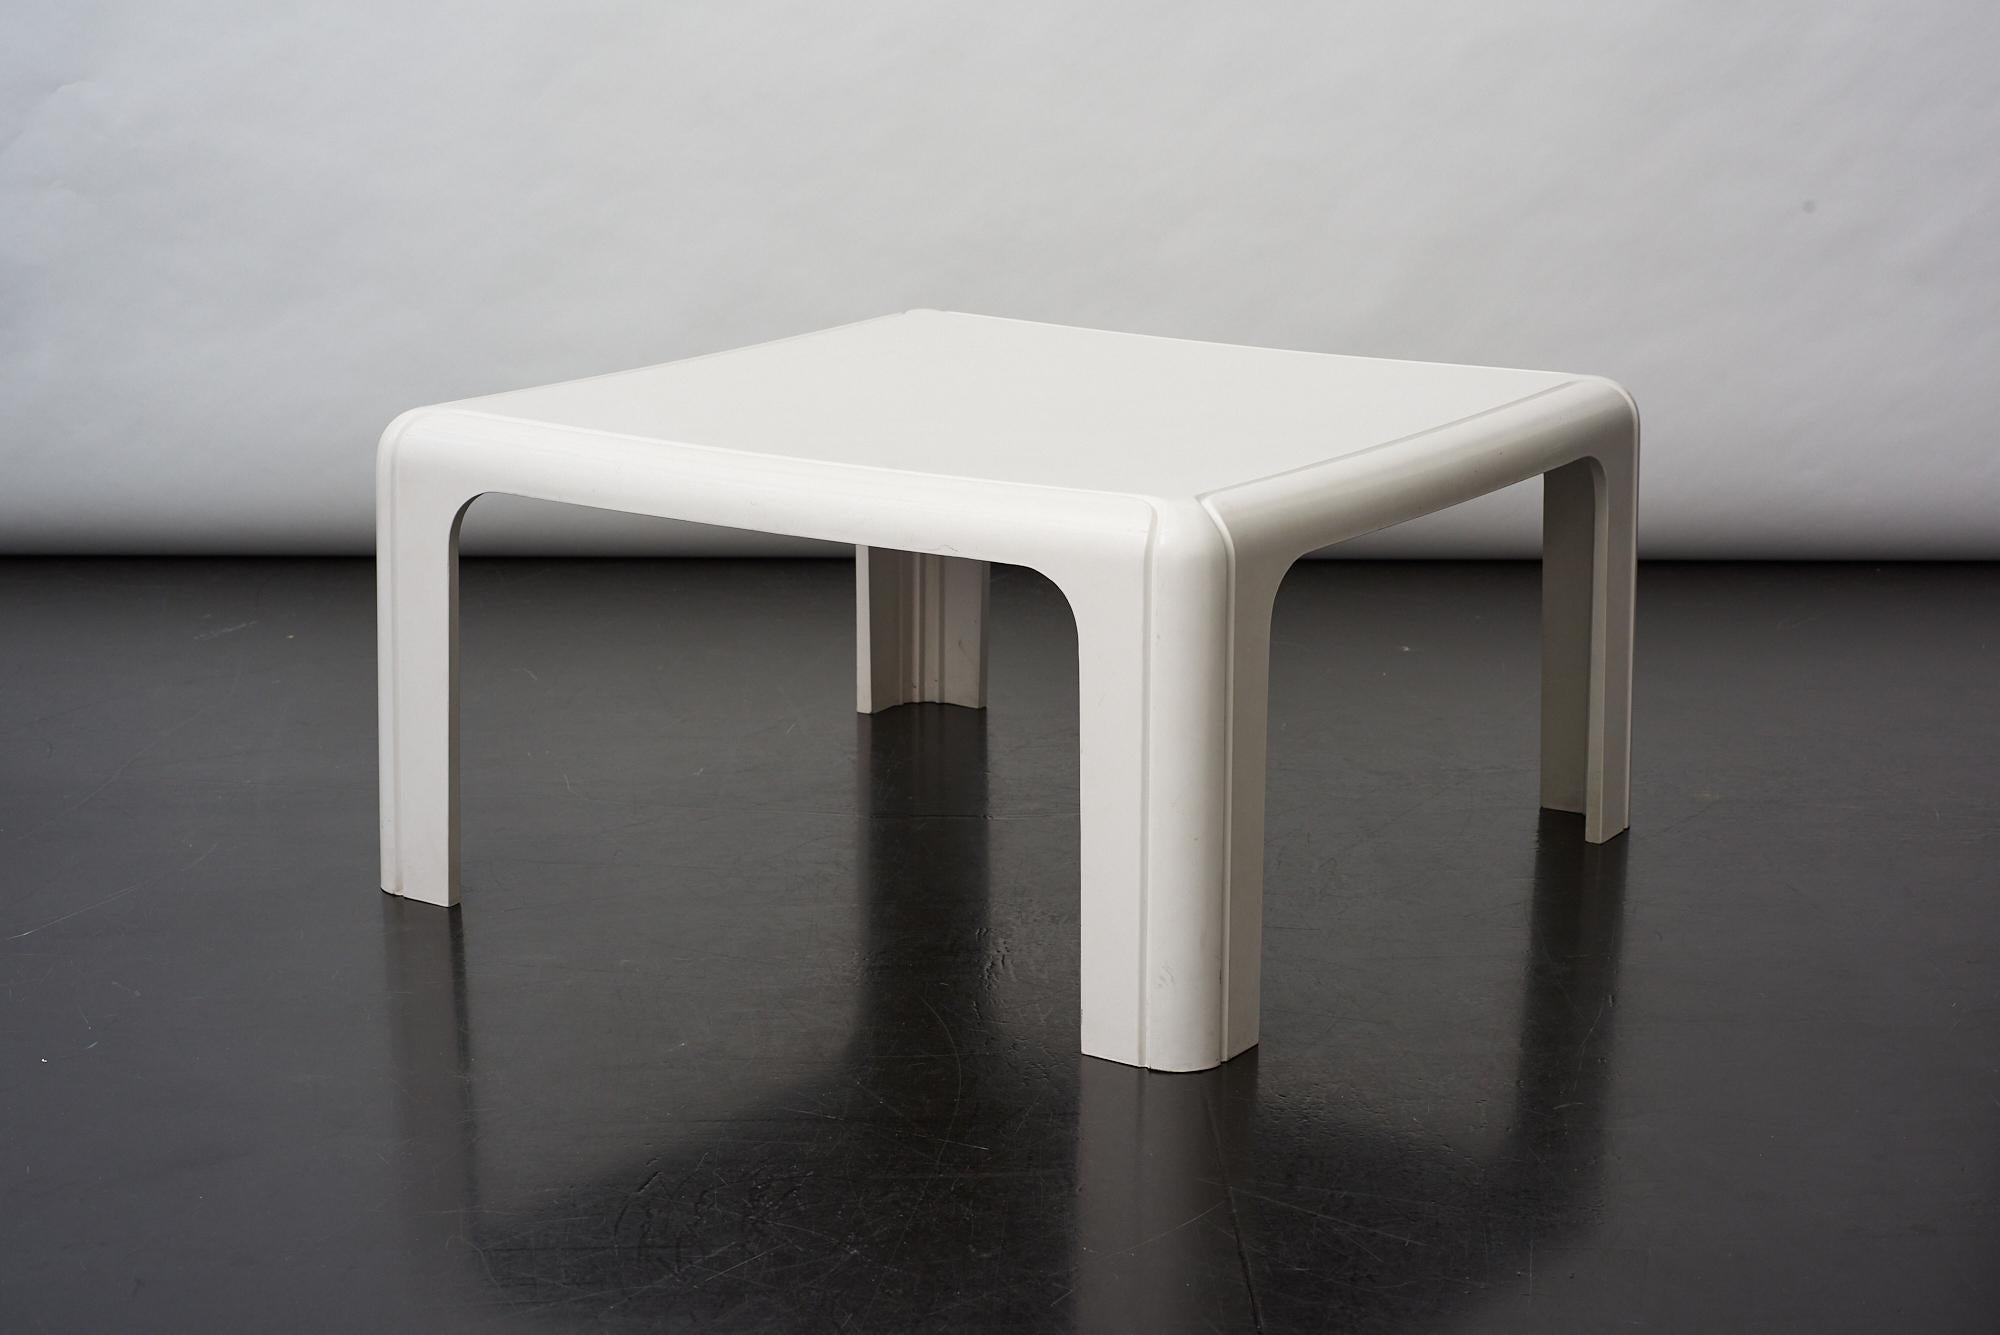 4894 coffee table by Gae Aulenti for Kartell, 1974.
Molded white polyurethane.
This striking design won the Compasso D'oro industrial design award in 1974.